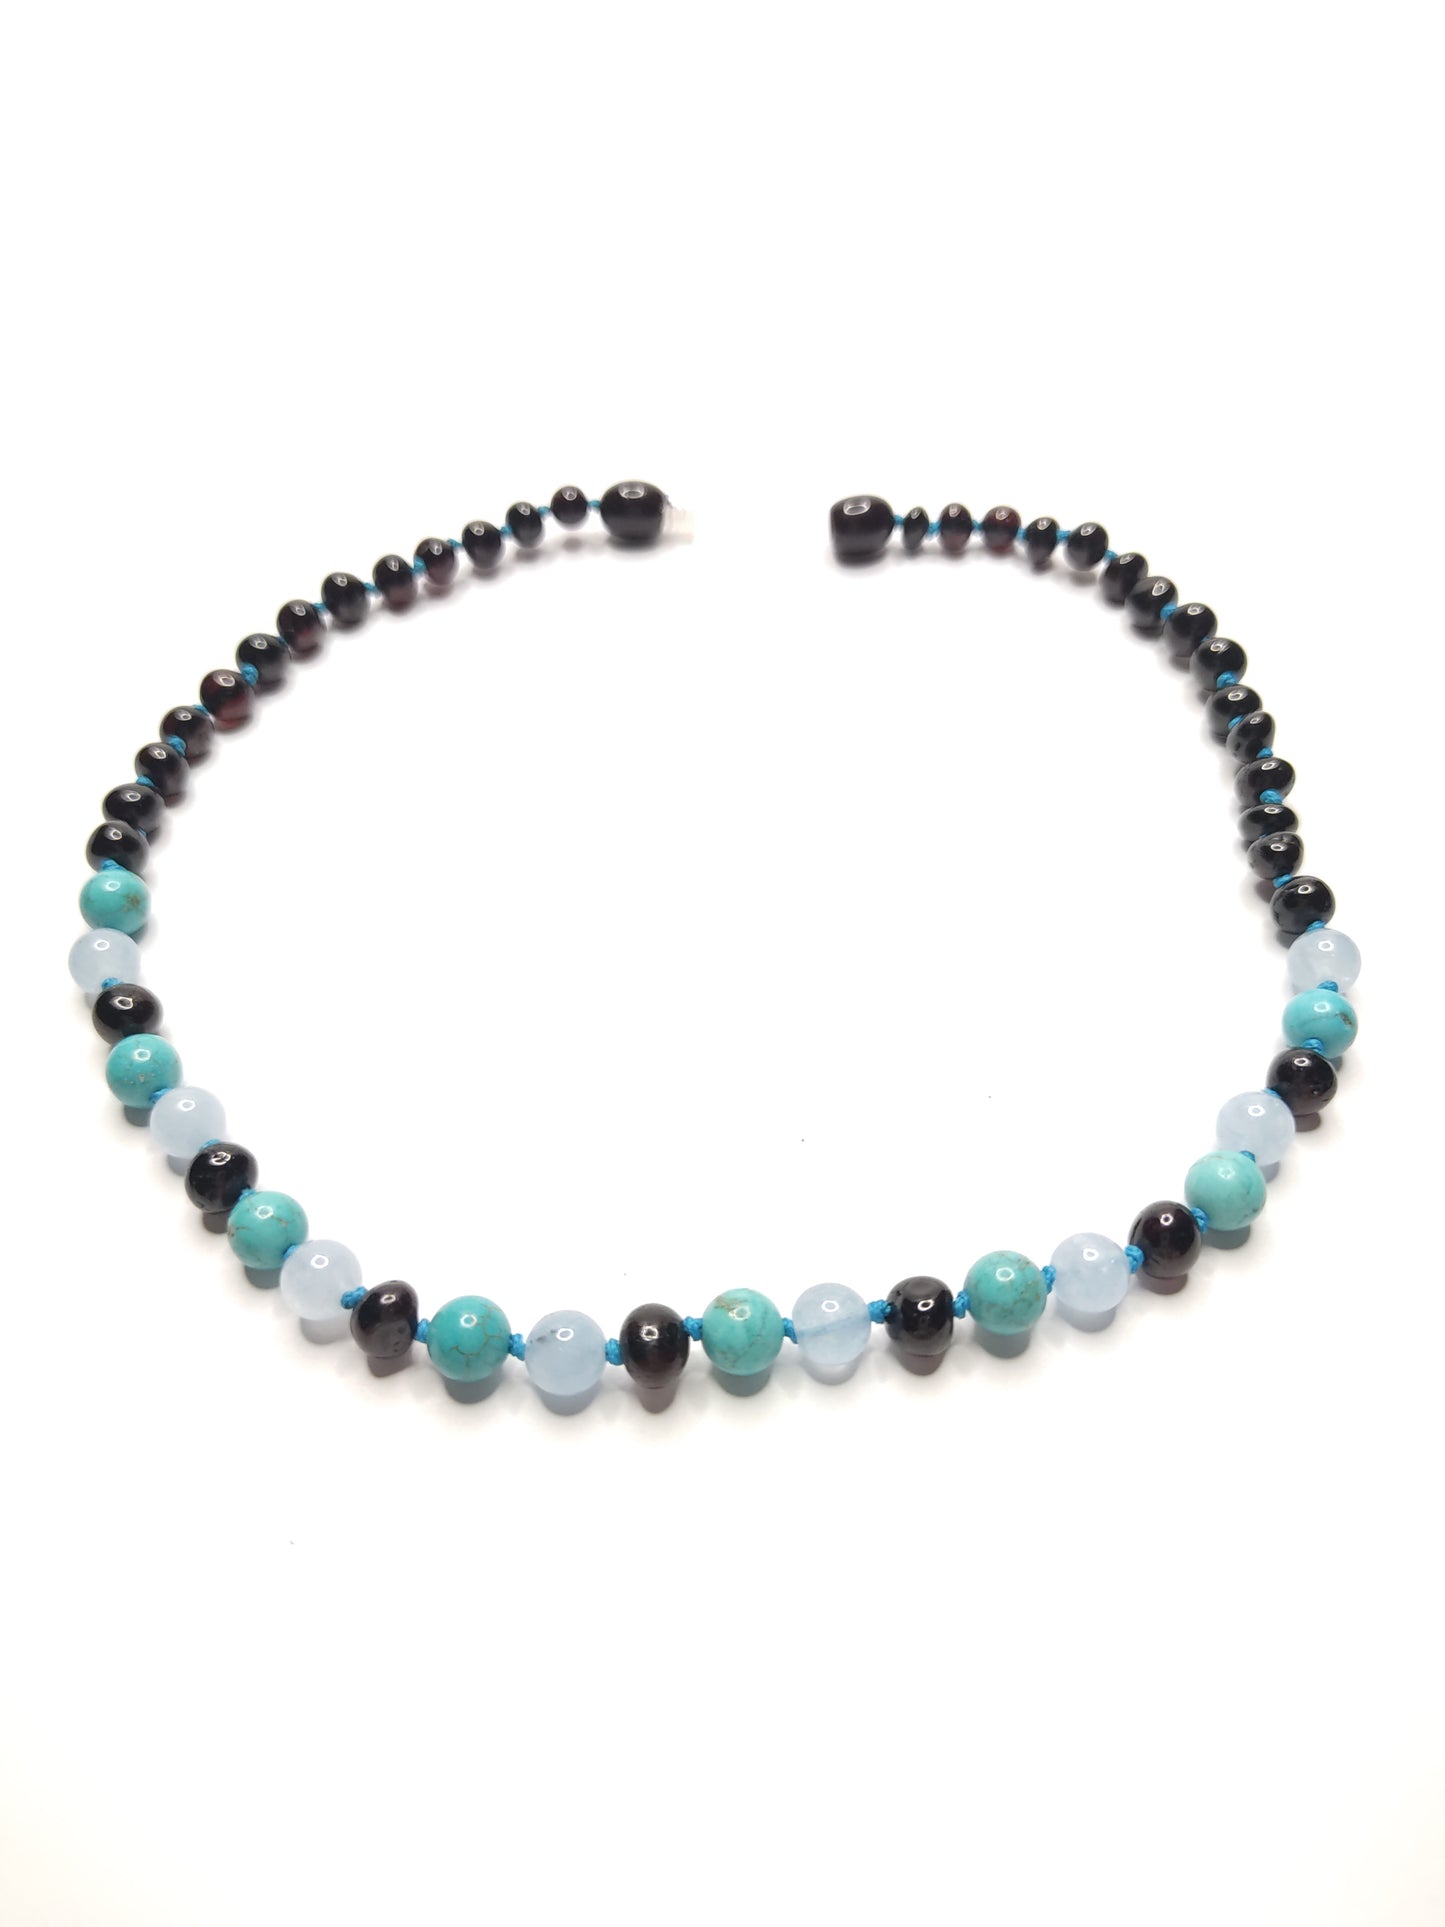 Dark Cherry  Baltic Amber , Turquoise and Amazonite natural stone necklace.